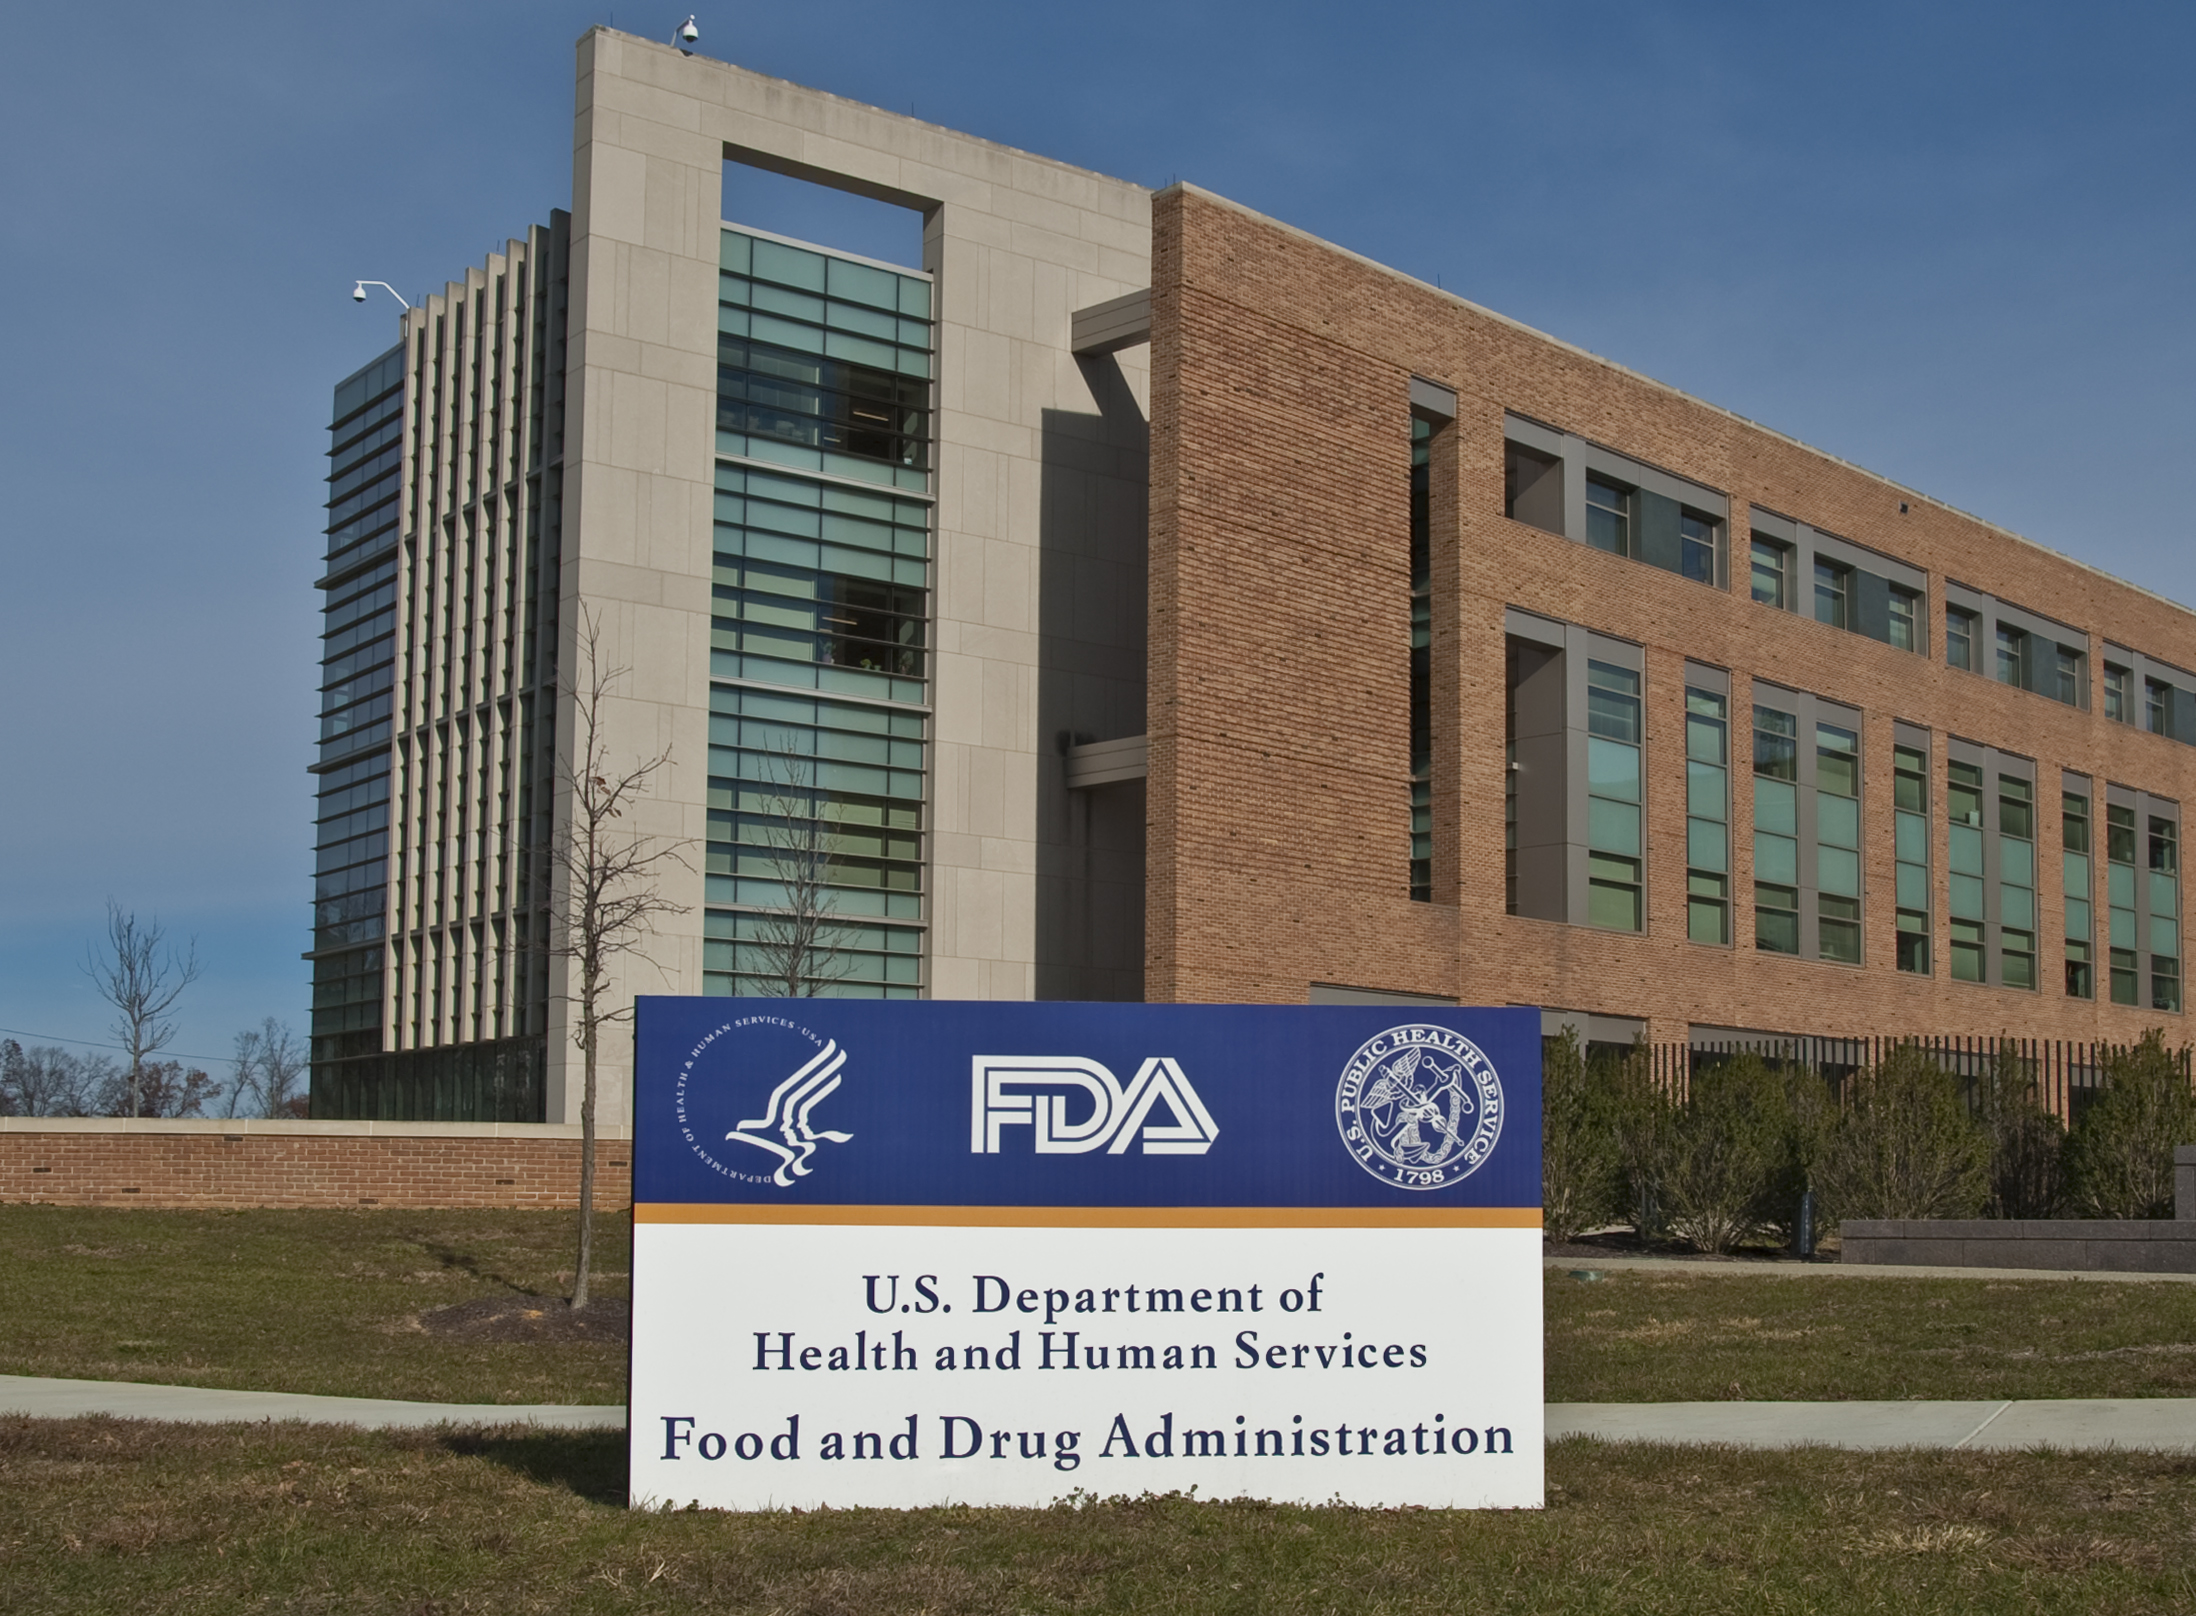 FDA headquarters building with sign - FDA, U.S. Department of Health and Human Services, Food and Drug Administration